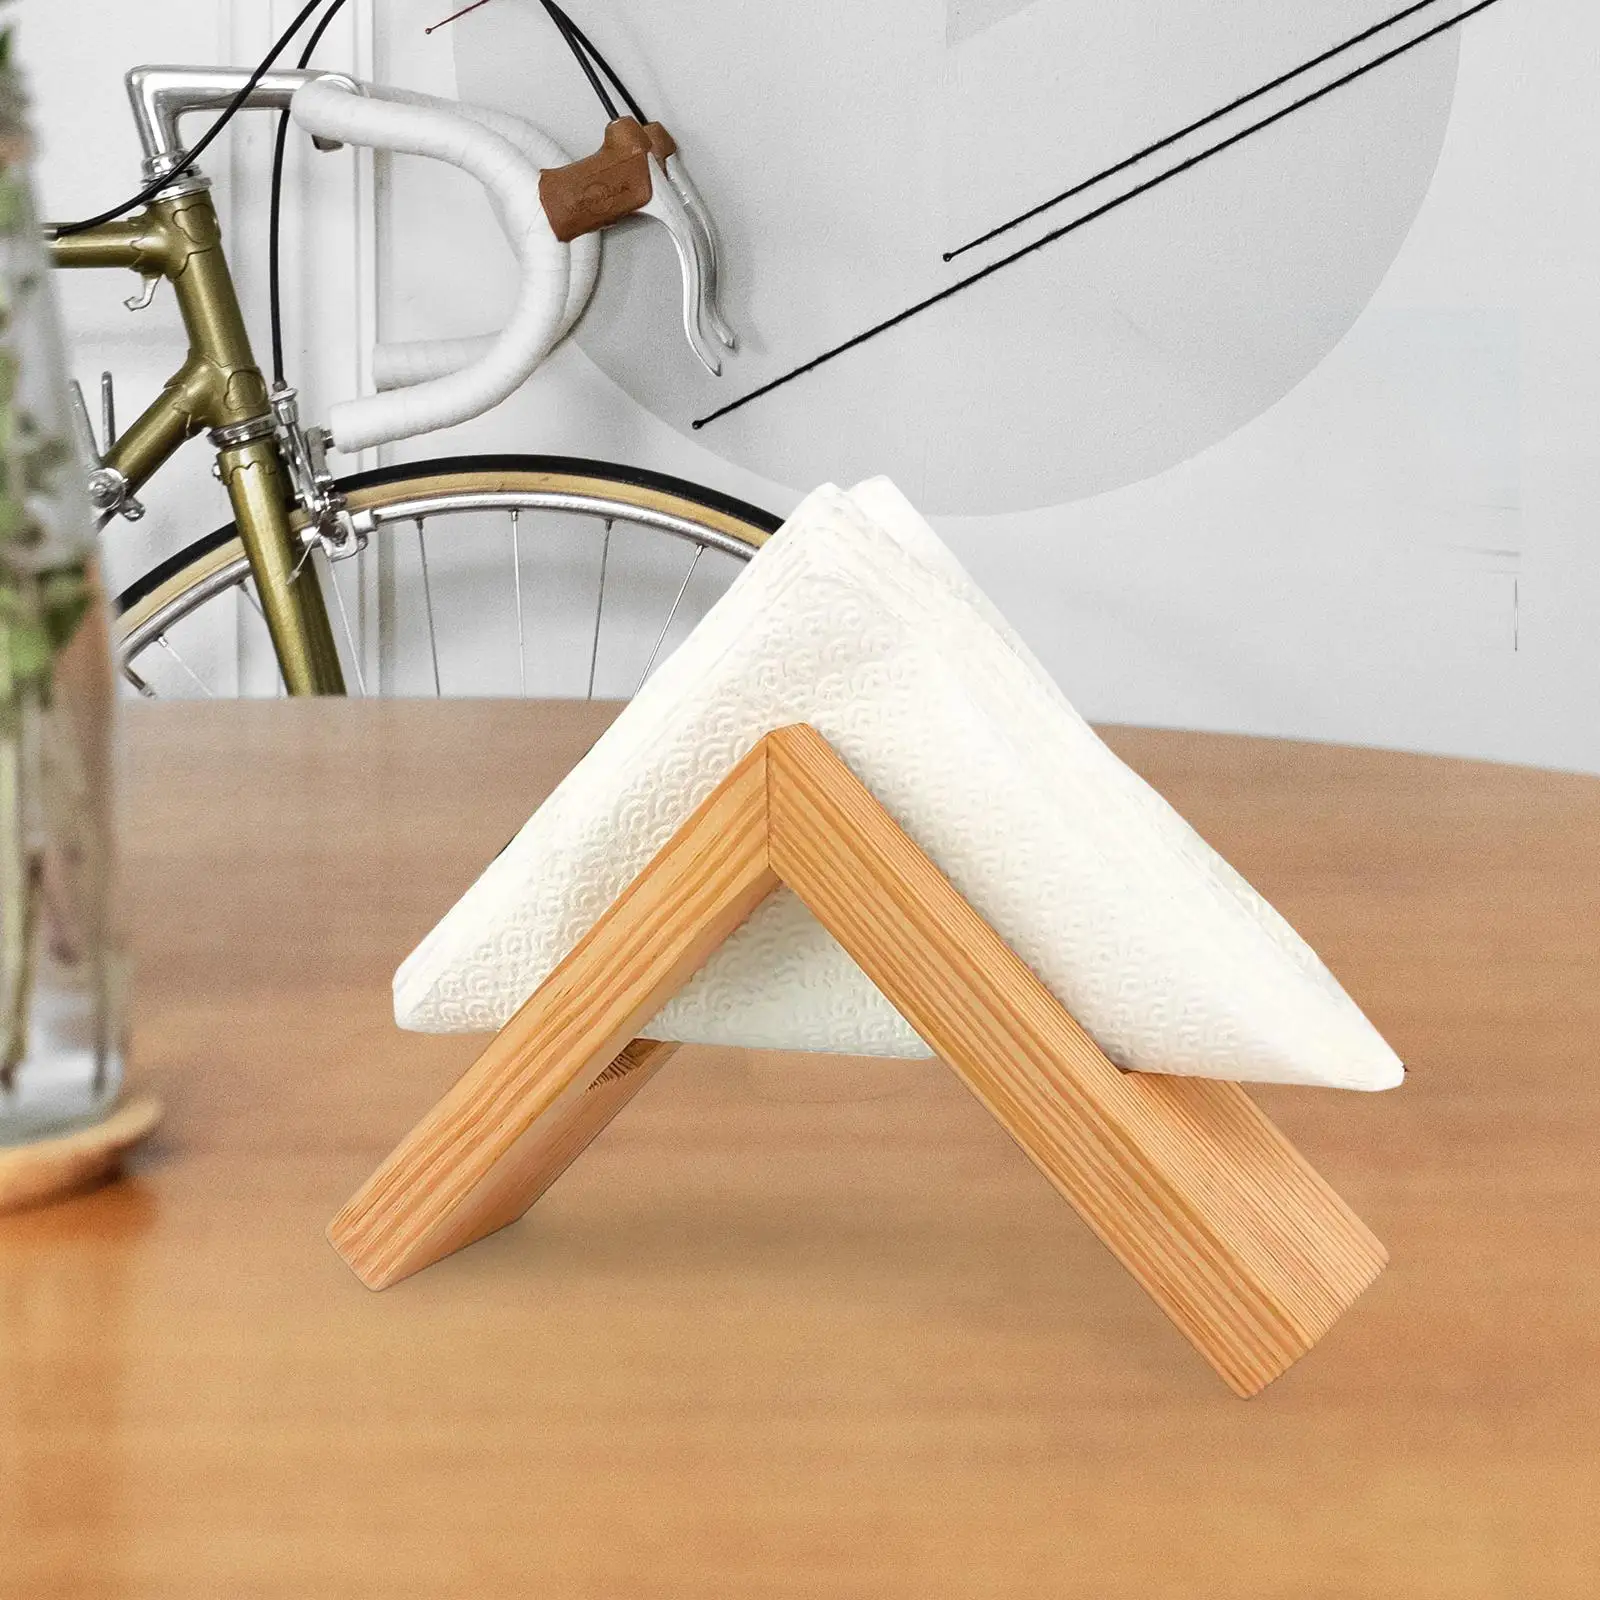 Wooden Napkin Holder Table Organizer for Kitchen Countertops Dining Table Cocktail Bar